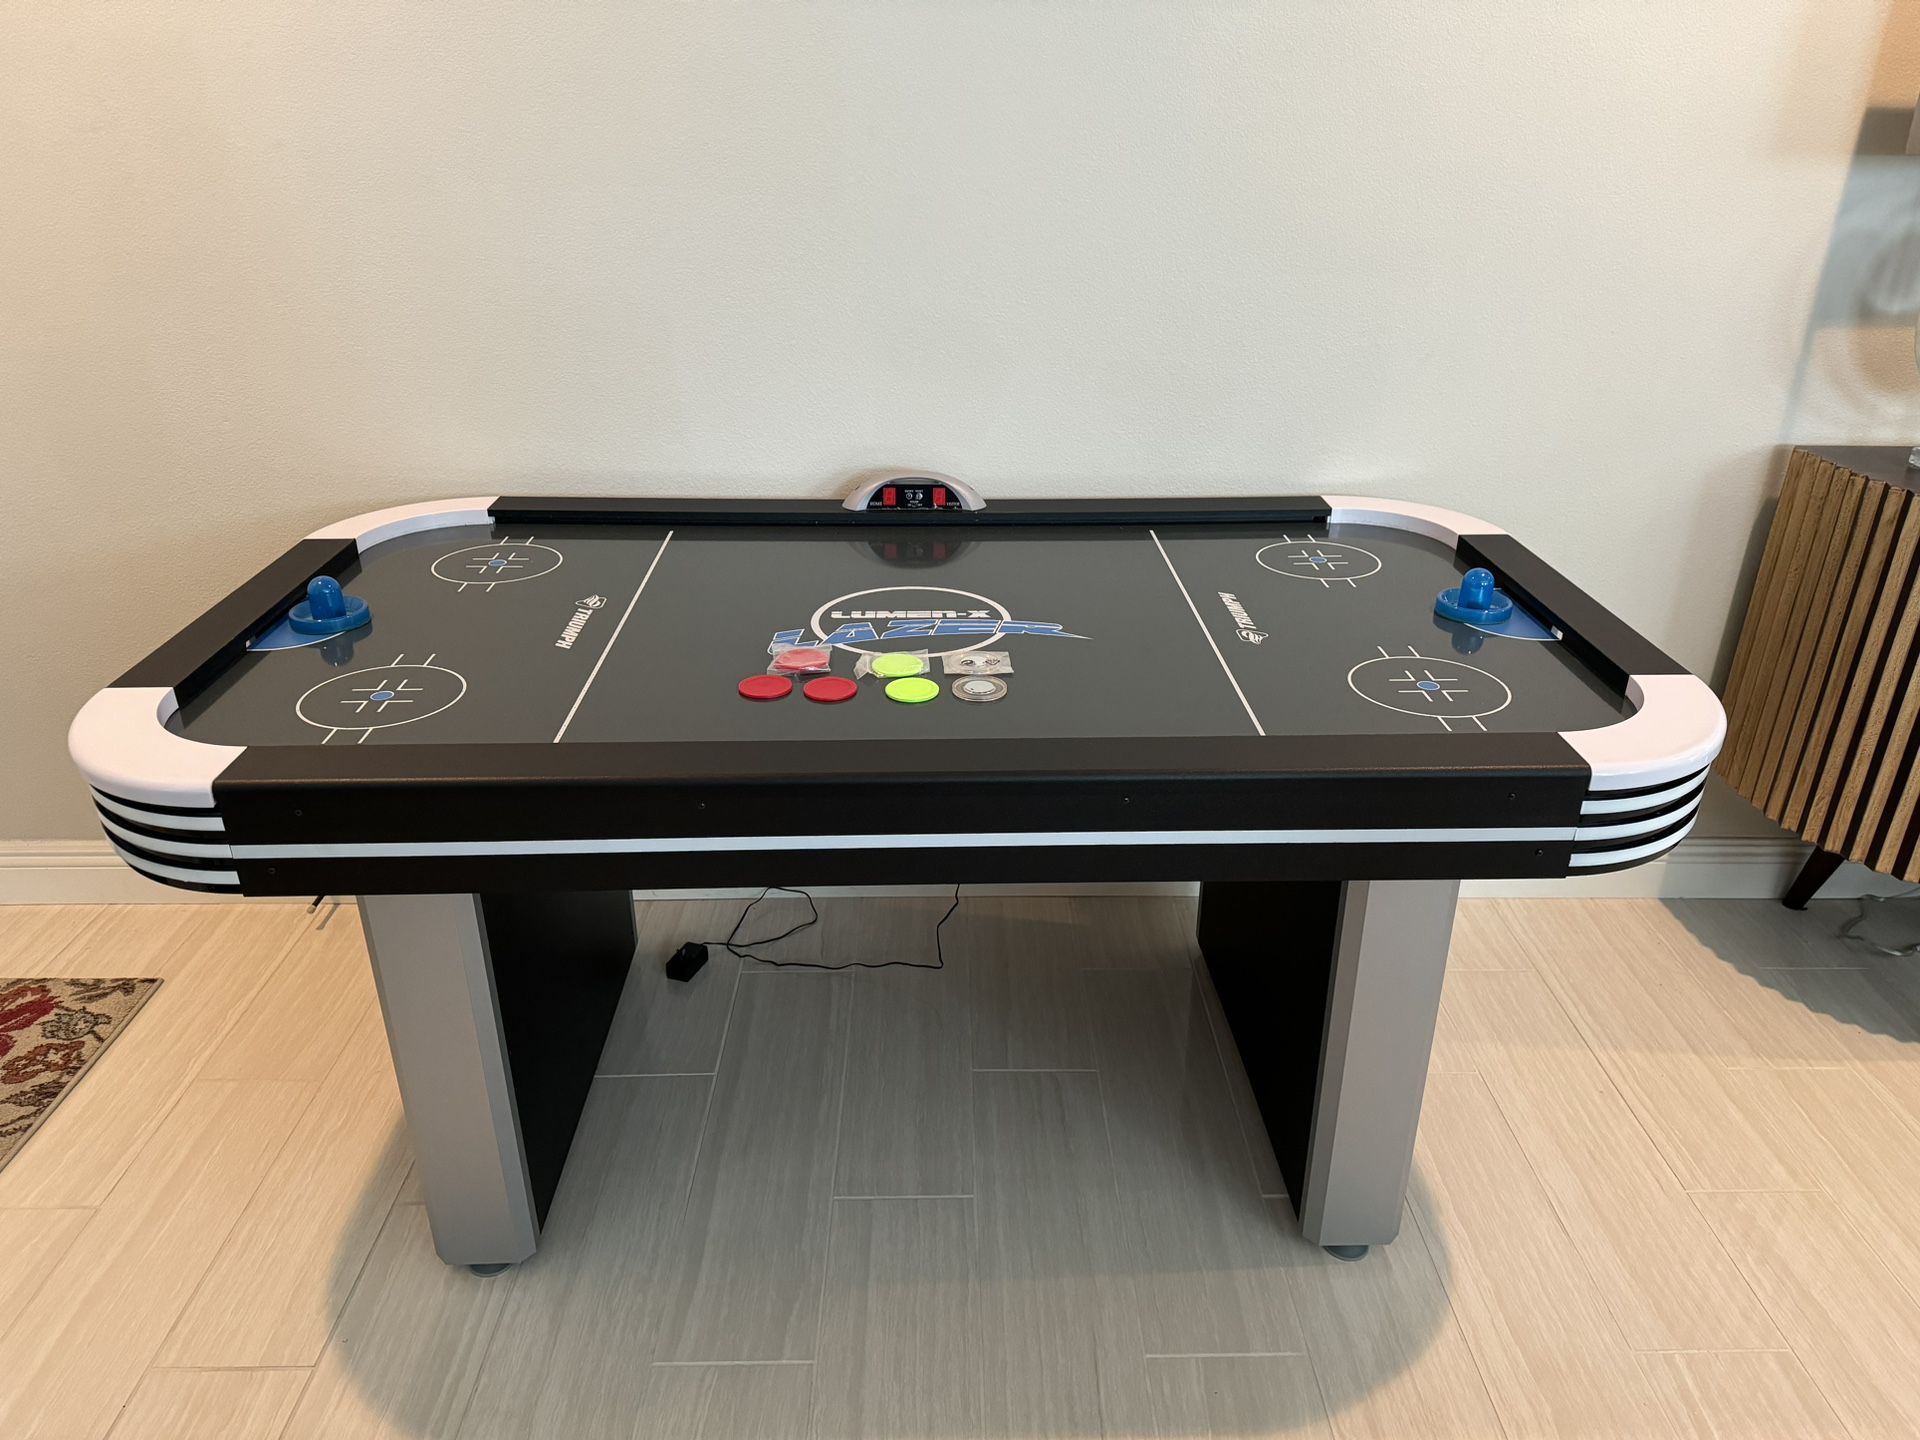 Lumen-X 72” Air Hockey Table With Led Lights